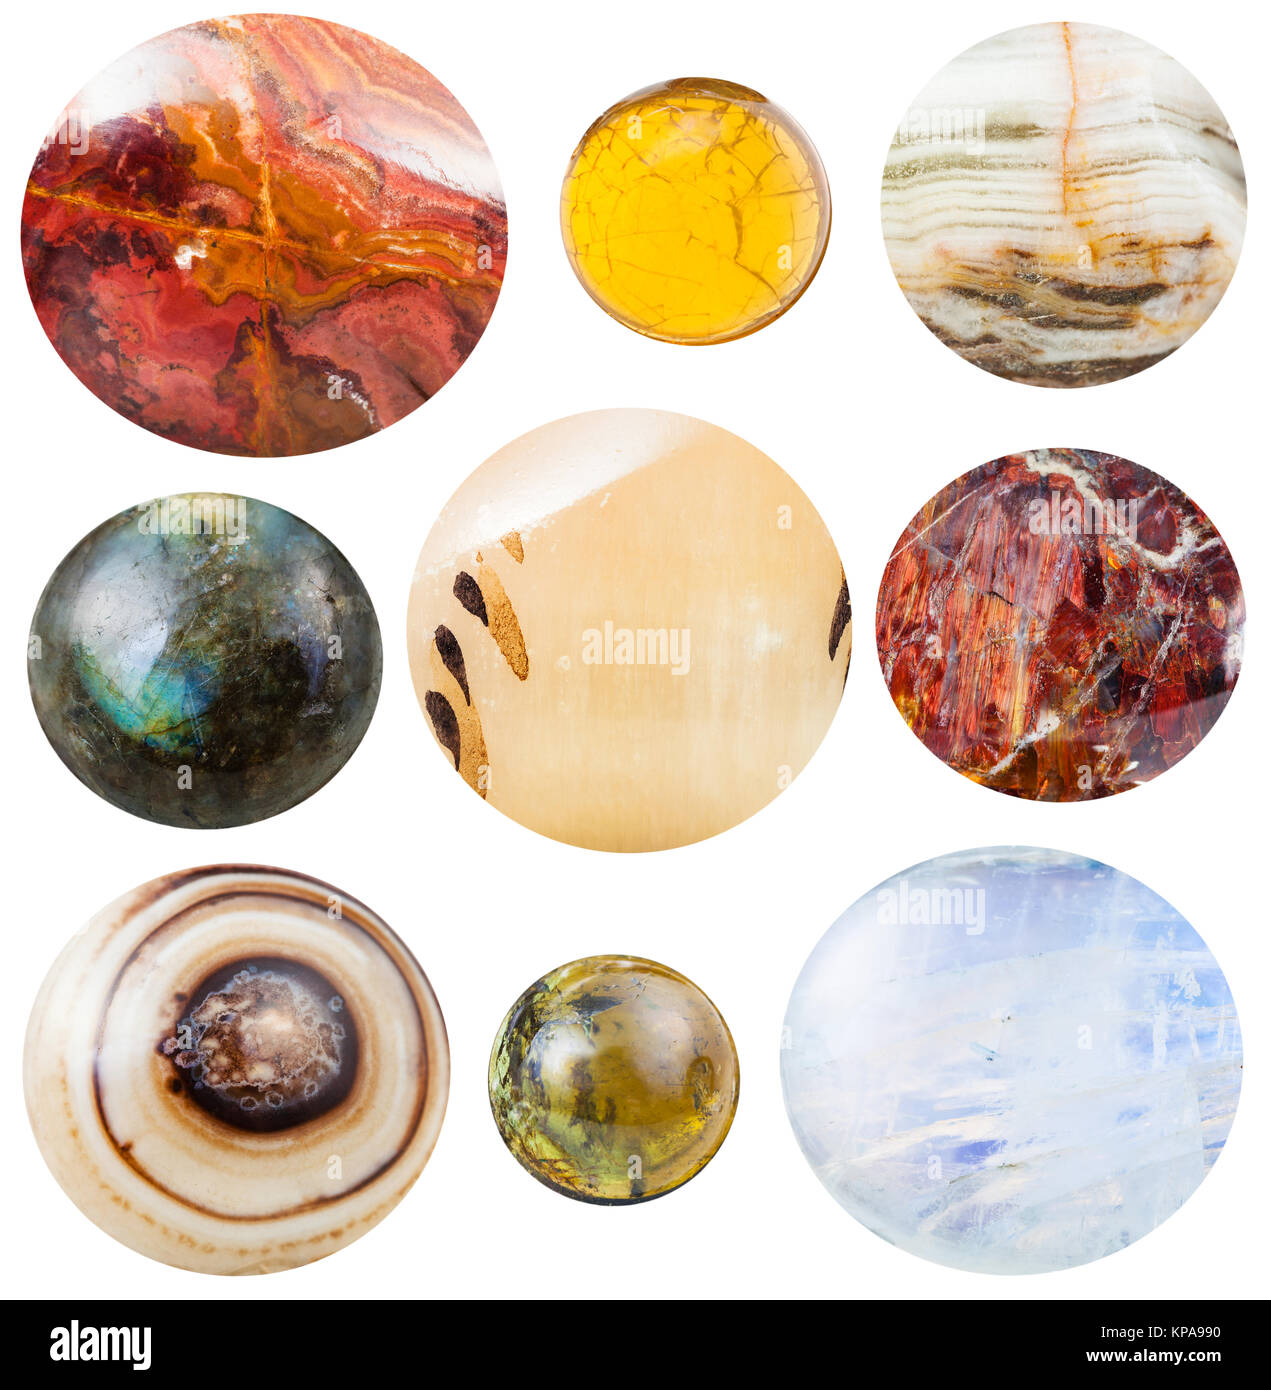 various round cabochon gem stones isolated Stock Photo